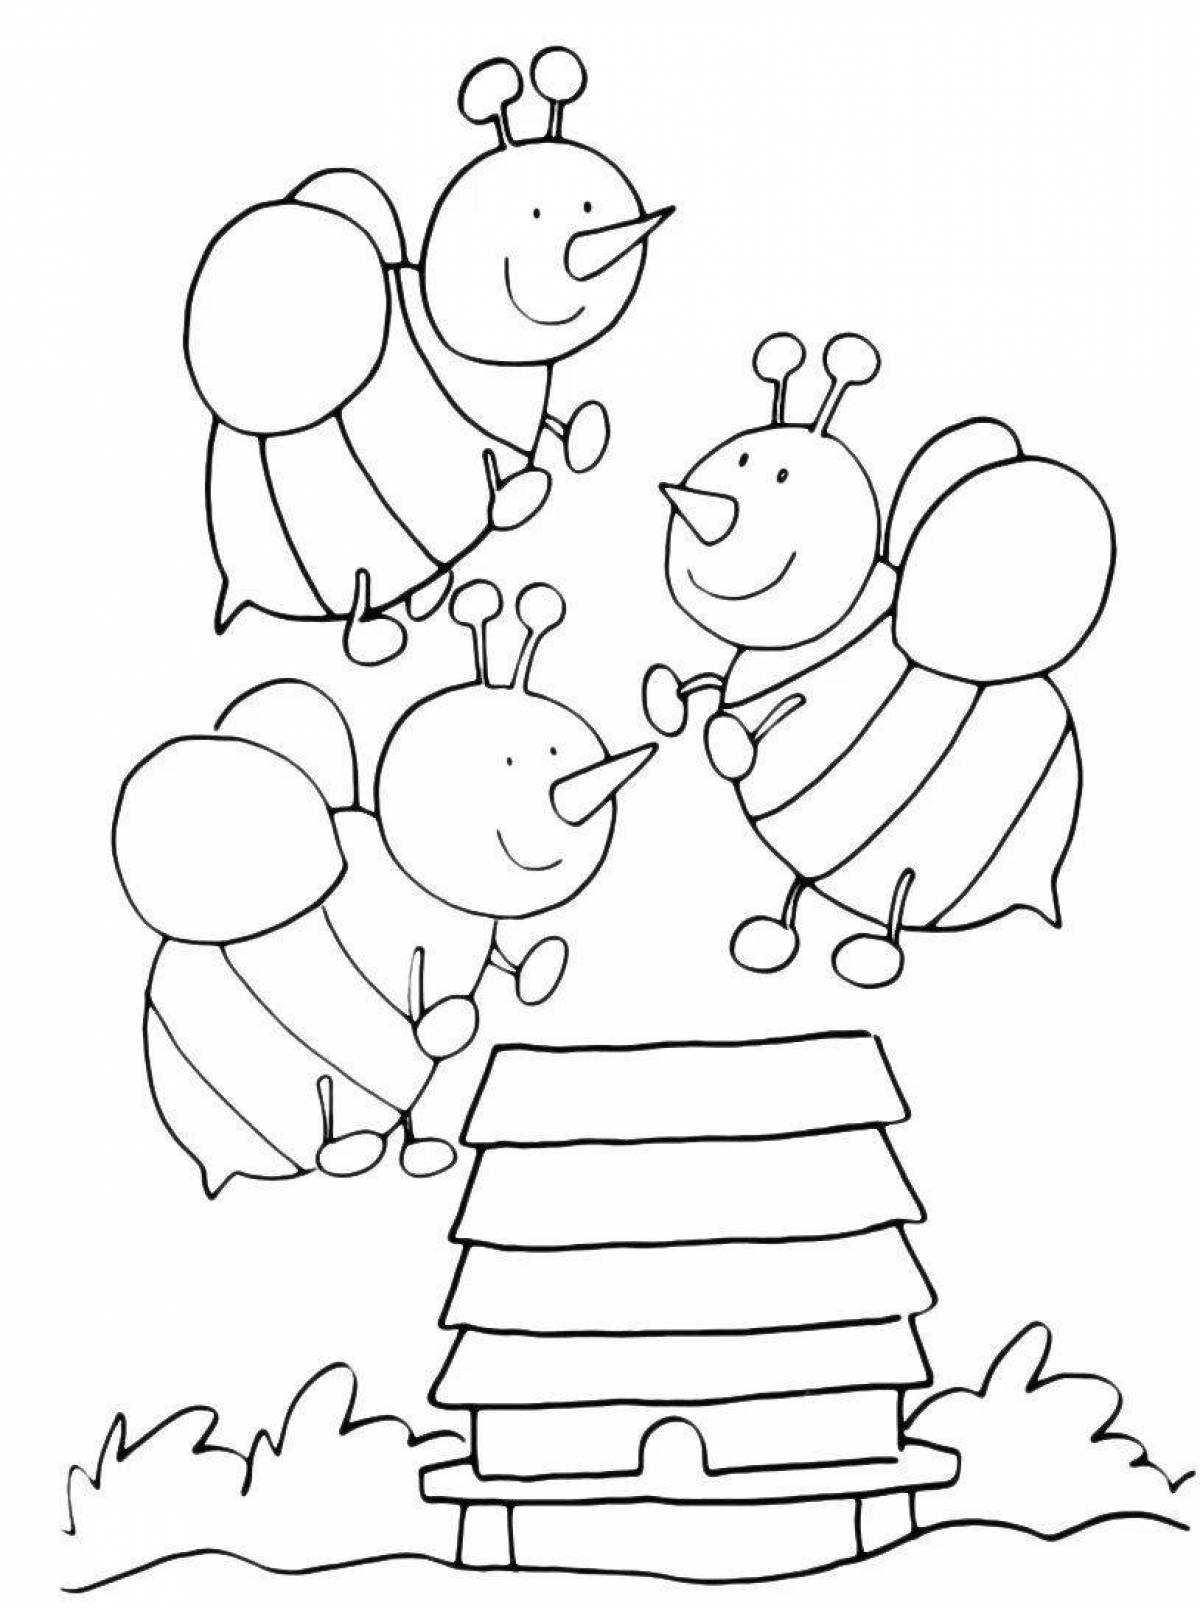 Fabulous beehive coloring book for kids